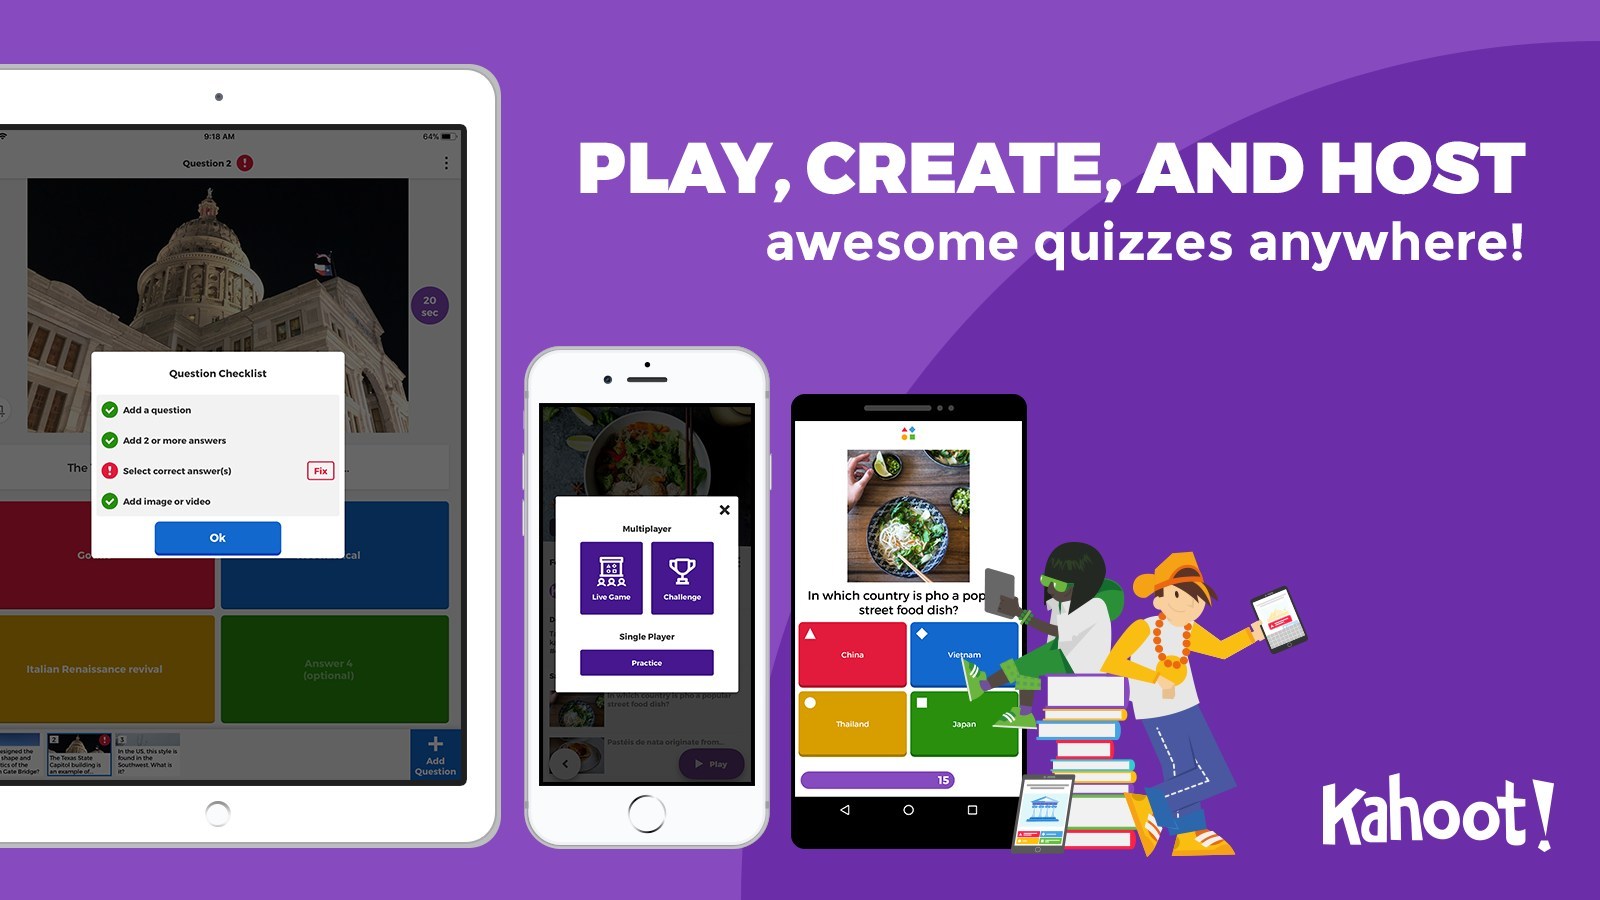 Kahoot Launches In App Quiz Creation And Hosting Tools To Turn